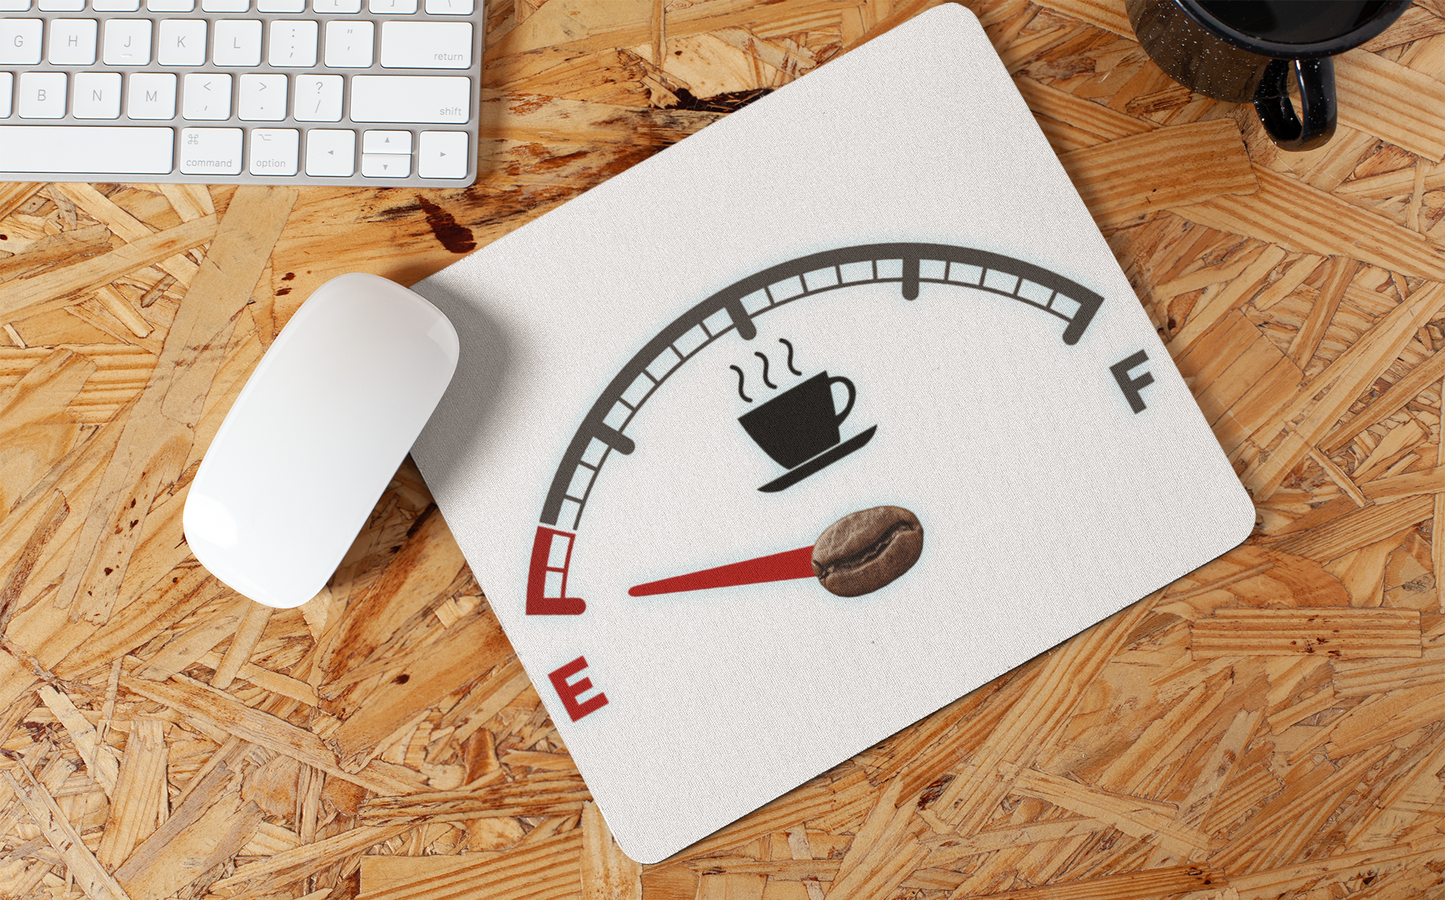 Running on empty, I NEED COFFEE! - Mouse pad Be Awesome coffee coffee bean coffee lover craft coffee custom mouse pad Drink Coffee mouse pad